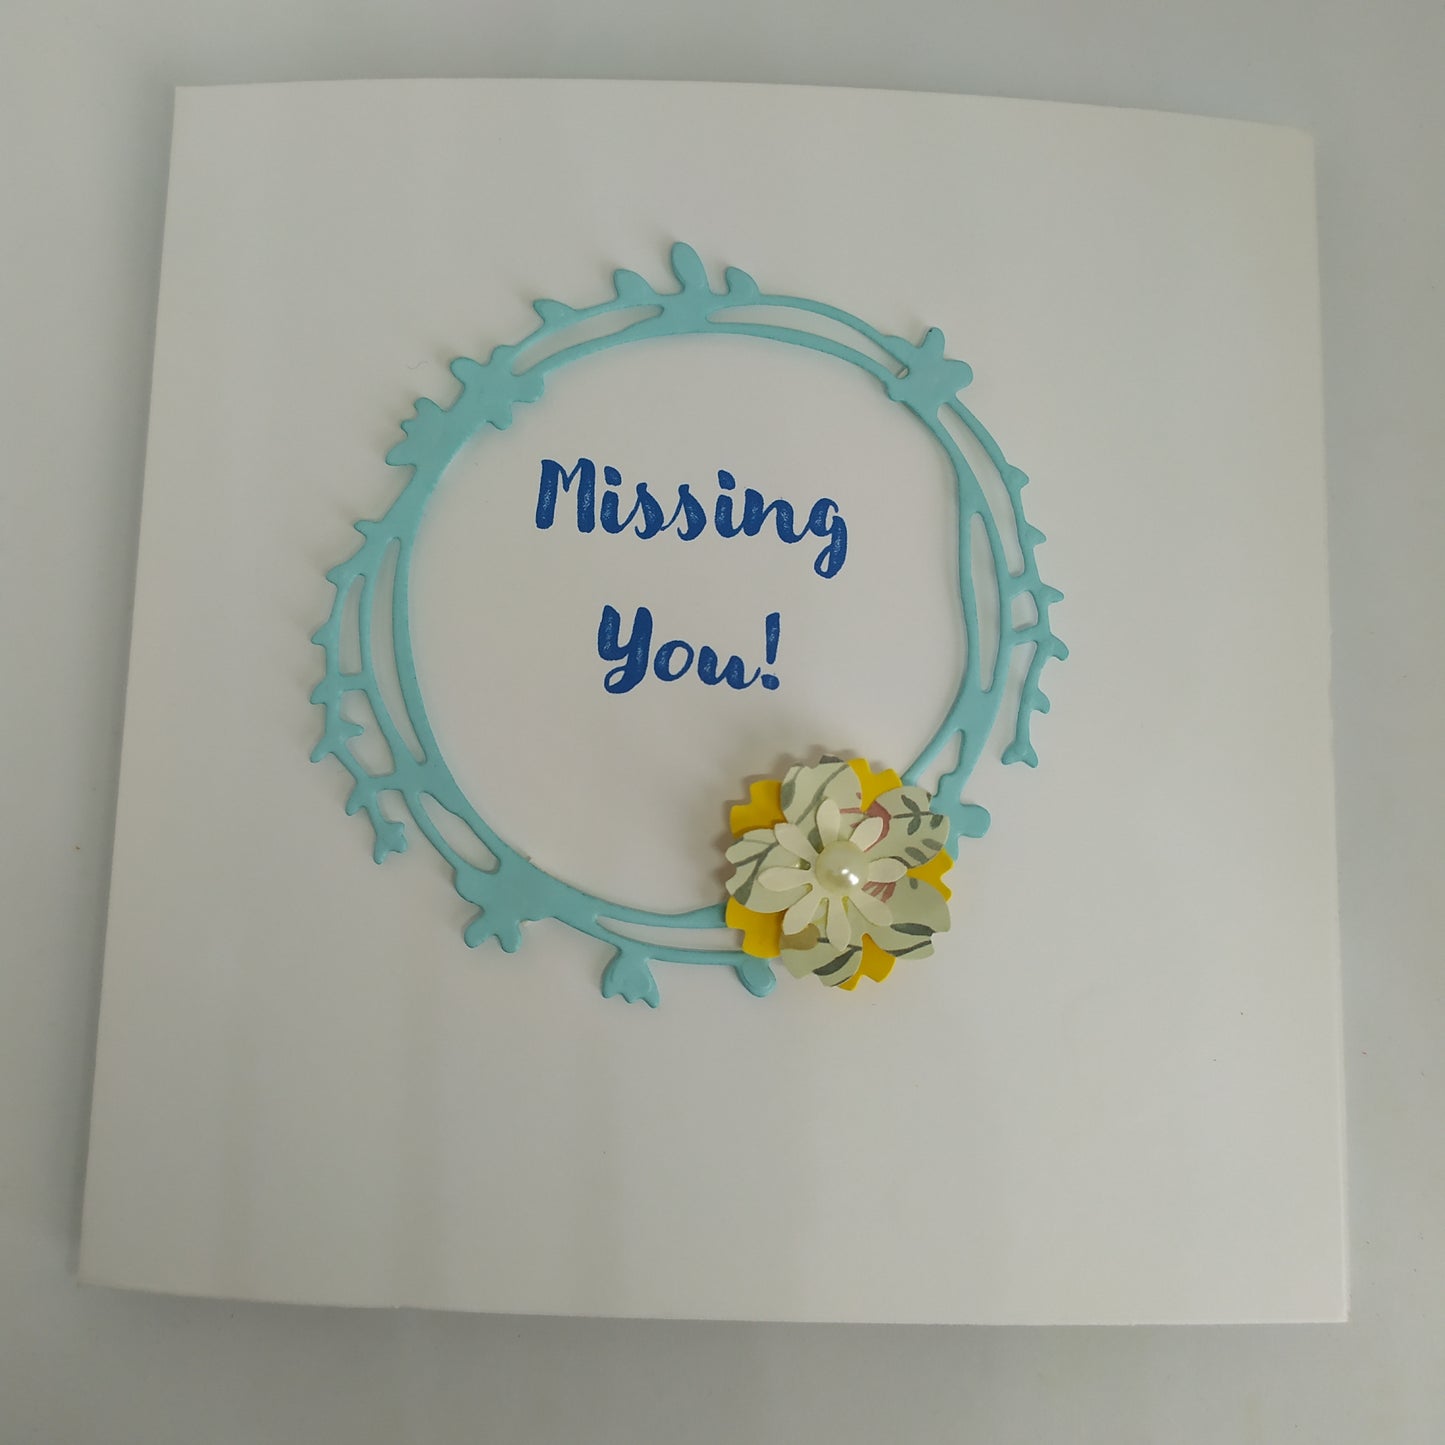 Missing You! Card